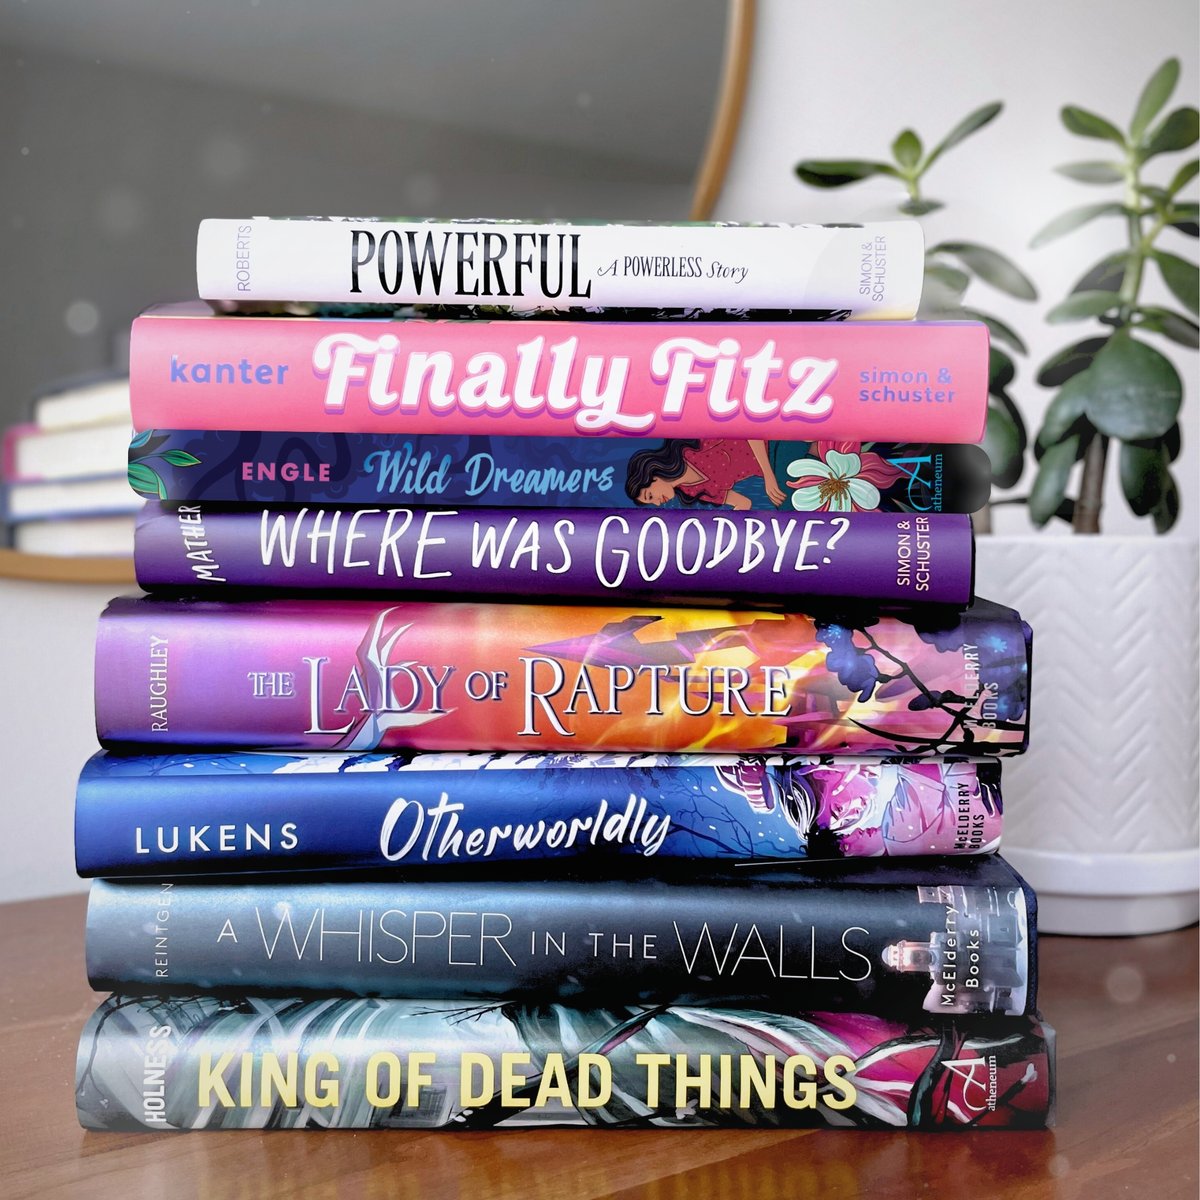 We closed out the spring season with SO many amazing new releases! Have you ready any of these must-read books yet? spr.ly/6019jPVcl